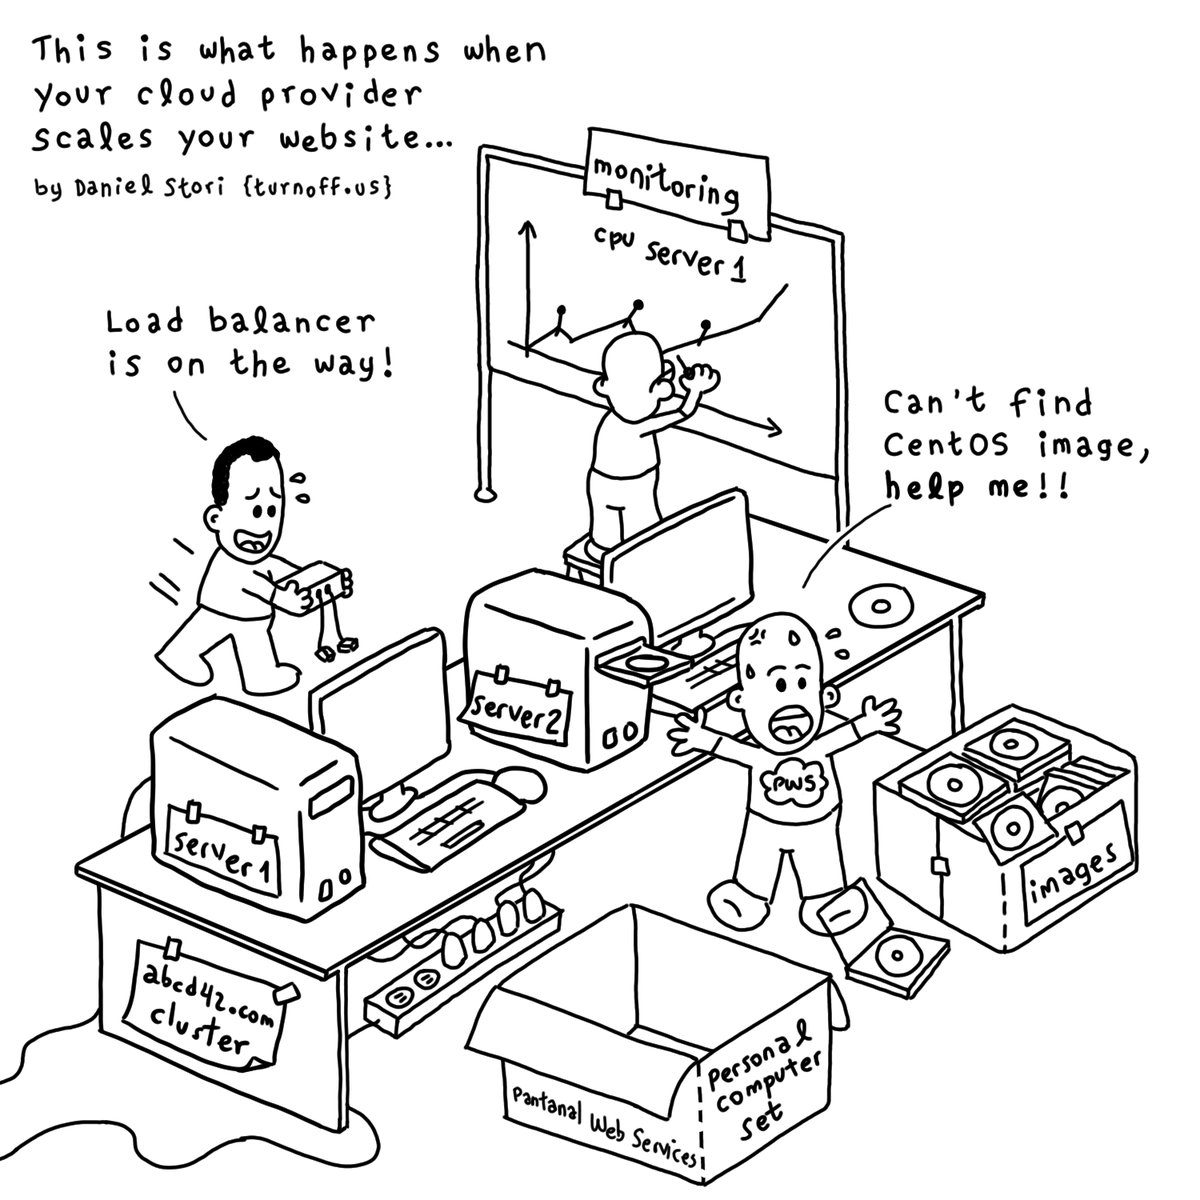 RT Cloud Autoscaling Revealed
#comic #cloud #autoscaling
https://t.co/SynSs18fwy  - embedded image 